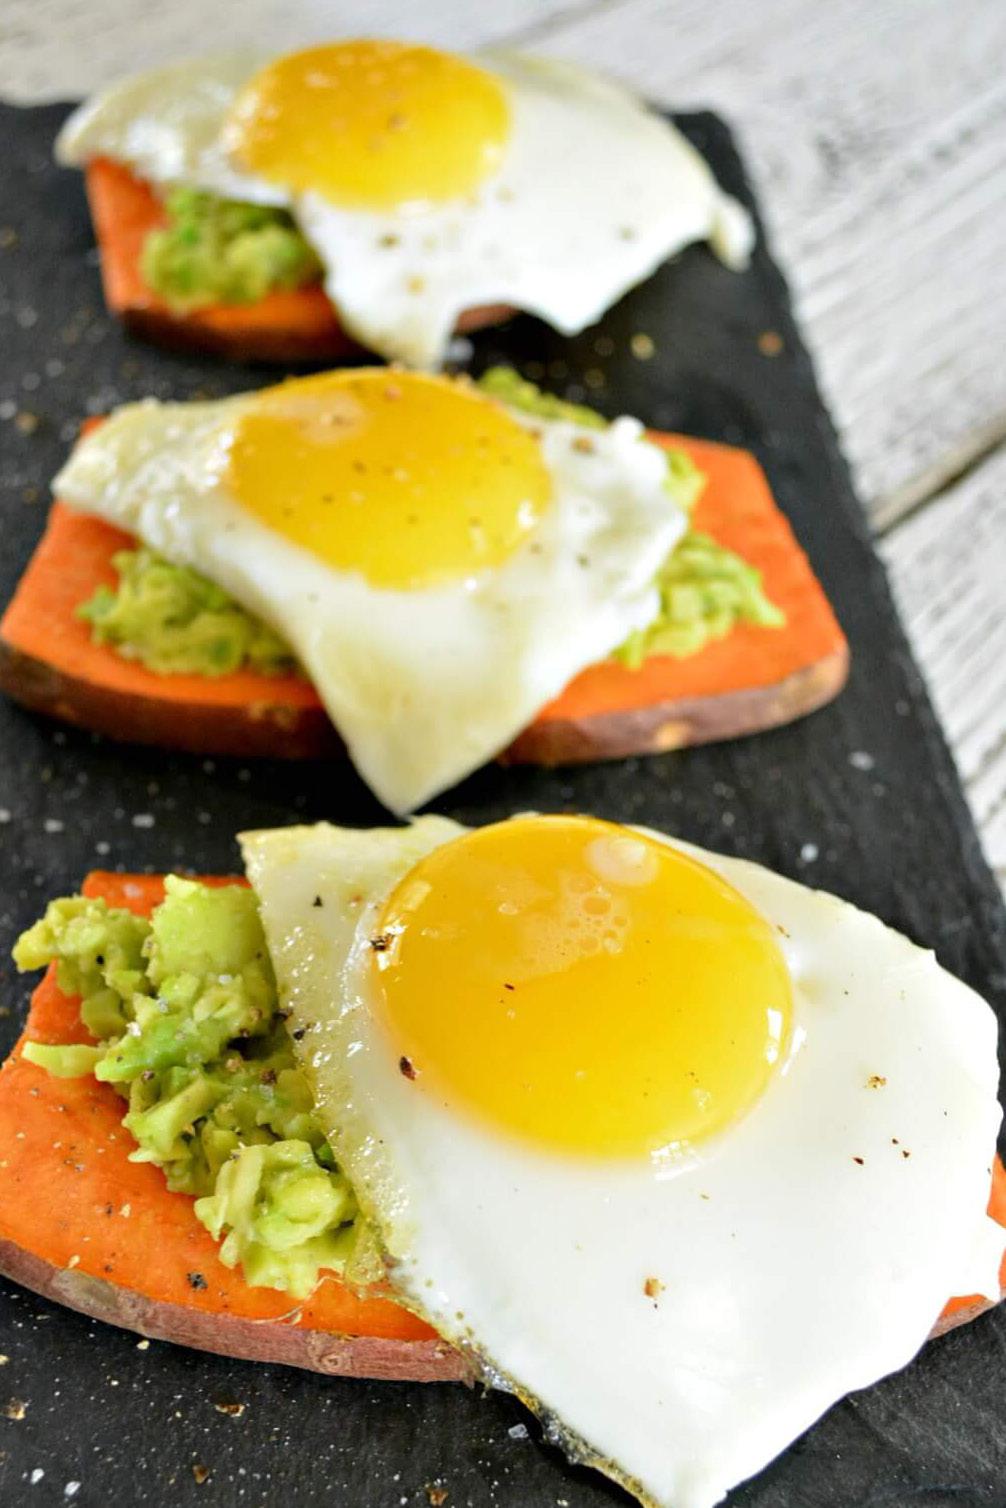 AVOCADO SUNNY- Side Up Egg Toast Prep Time: 10 minutes Cook Time: 5 minutes Serves: 4-8 1-2 sweet potatoes, ends cut off and sliced ¼-inch thick 1 avocado, mashed with fork 1 egg per slice of sweet